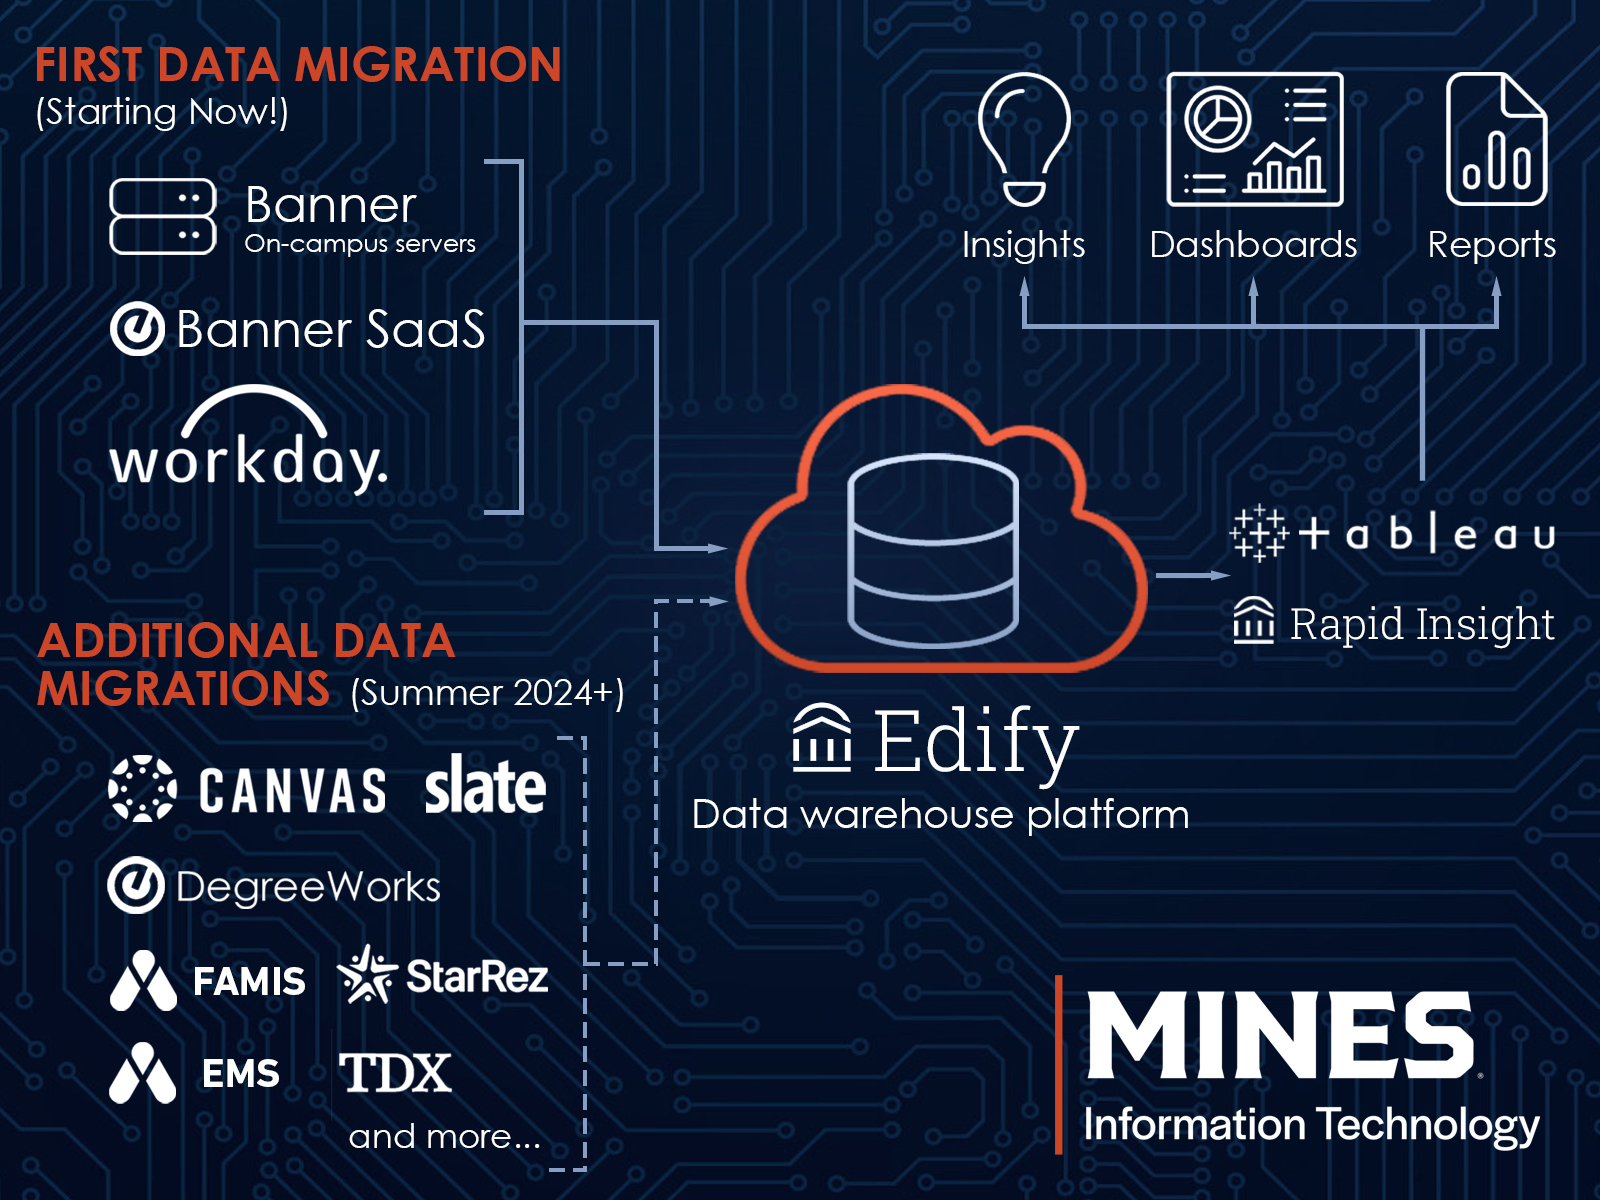 Graphic defining the inputs to Edify - Banner HR/Finance/Student, Workday HR/Finance, Banner Cloud Data. Some future inputs include Canvas, Slate, and Degreeworks. Output from the data warehouse is through Tableau to create reports, dashboards, and insights.